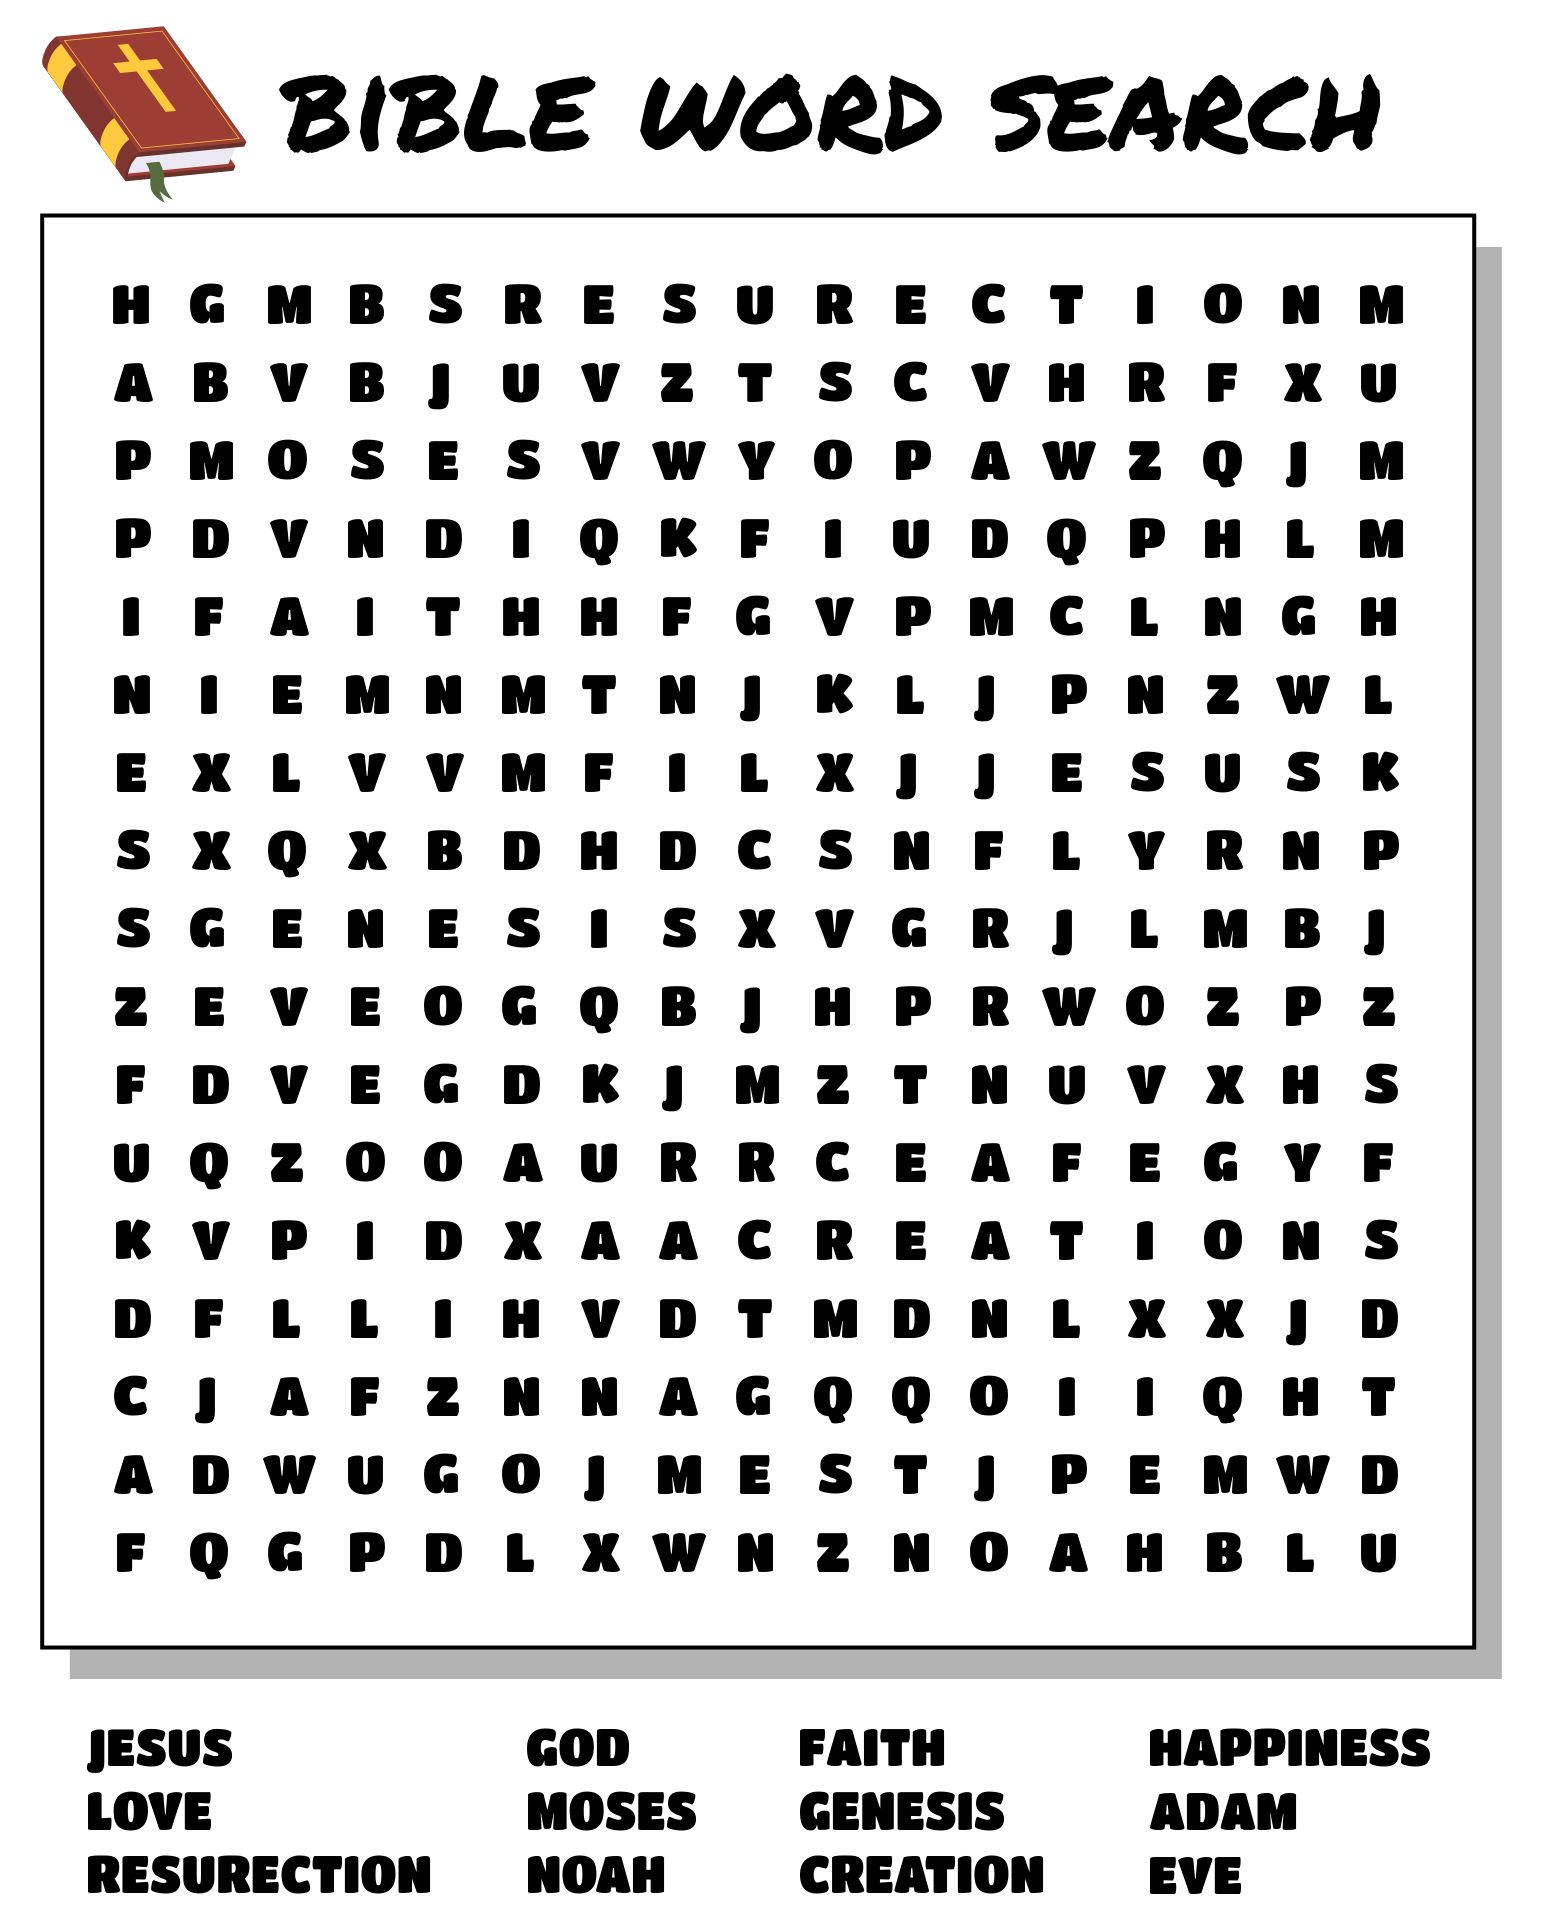 5-best-images-of-biblical-word-search-printable-free-bible-word